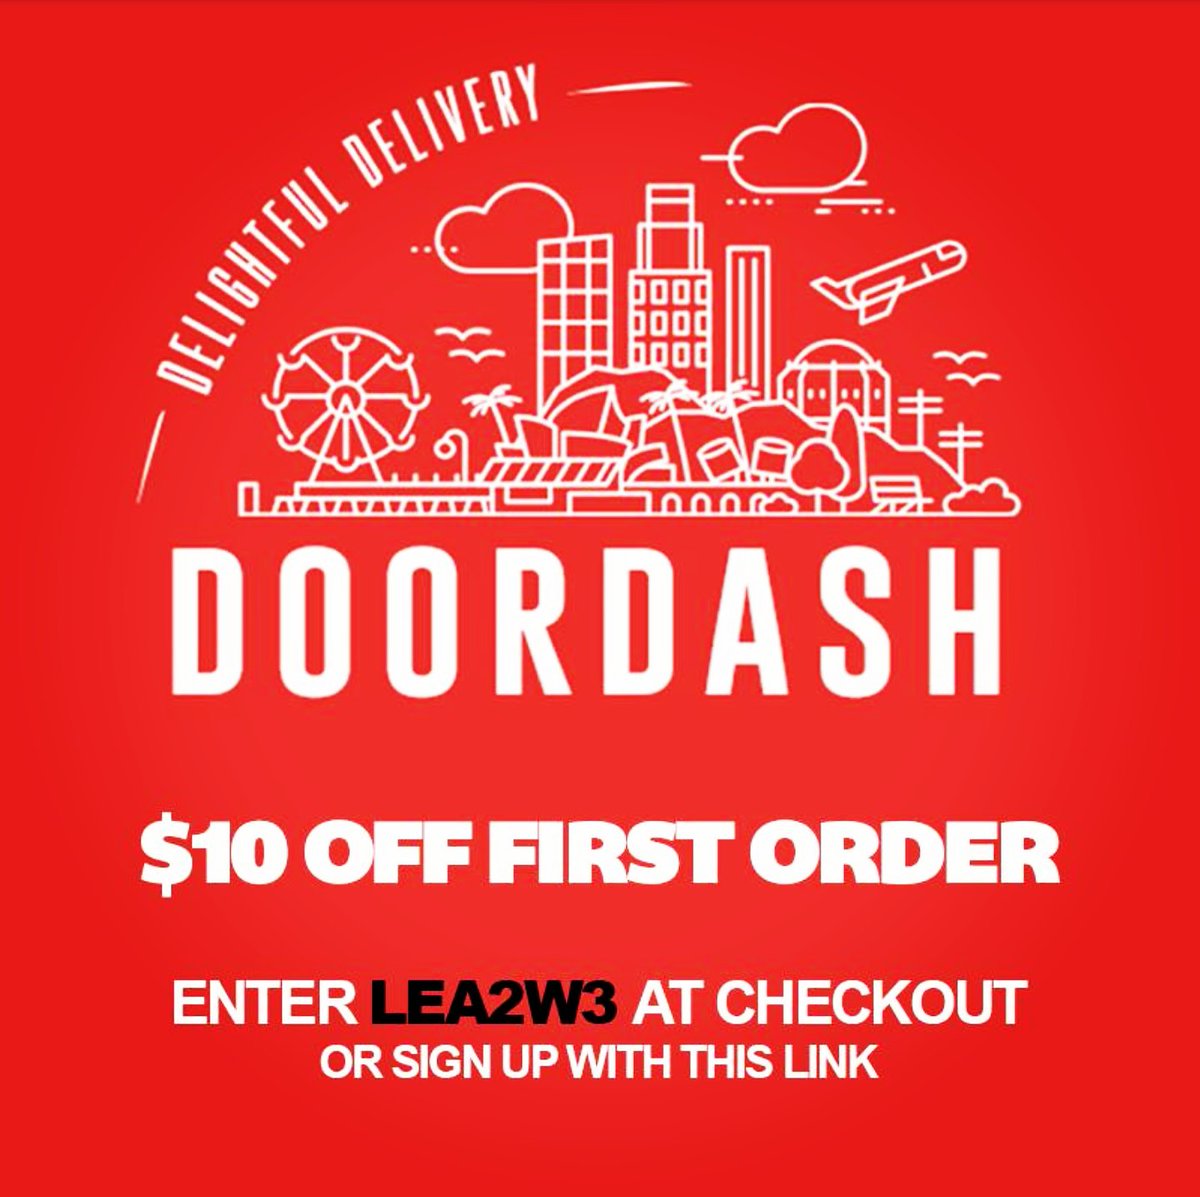 Doordash Canada Promo Code Lea2w3 At Check Out Or Using The Link Below To Sign Up Drd Sh Lea2w3 Doordash Doordashpromo Freebie Promocode Promocodes Freefood Sc 1 St Pezcame Com